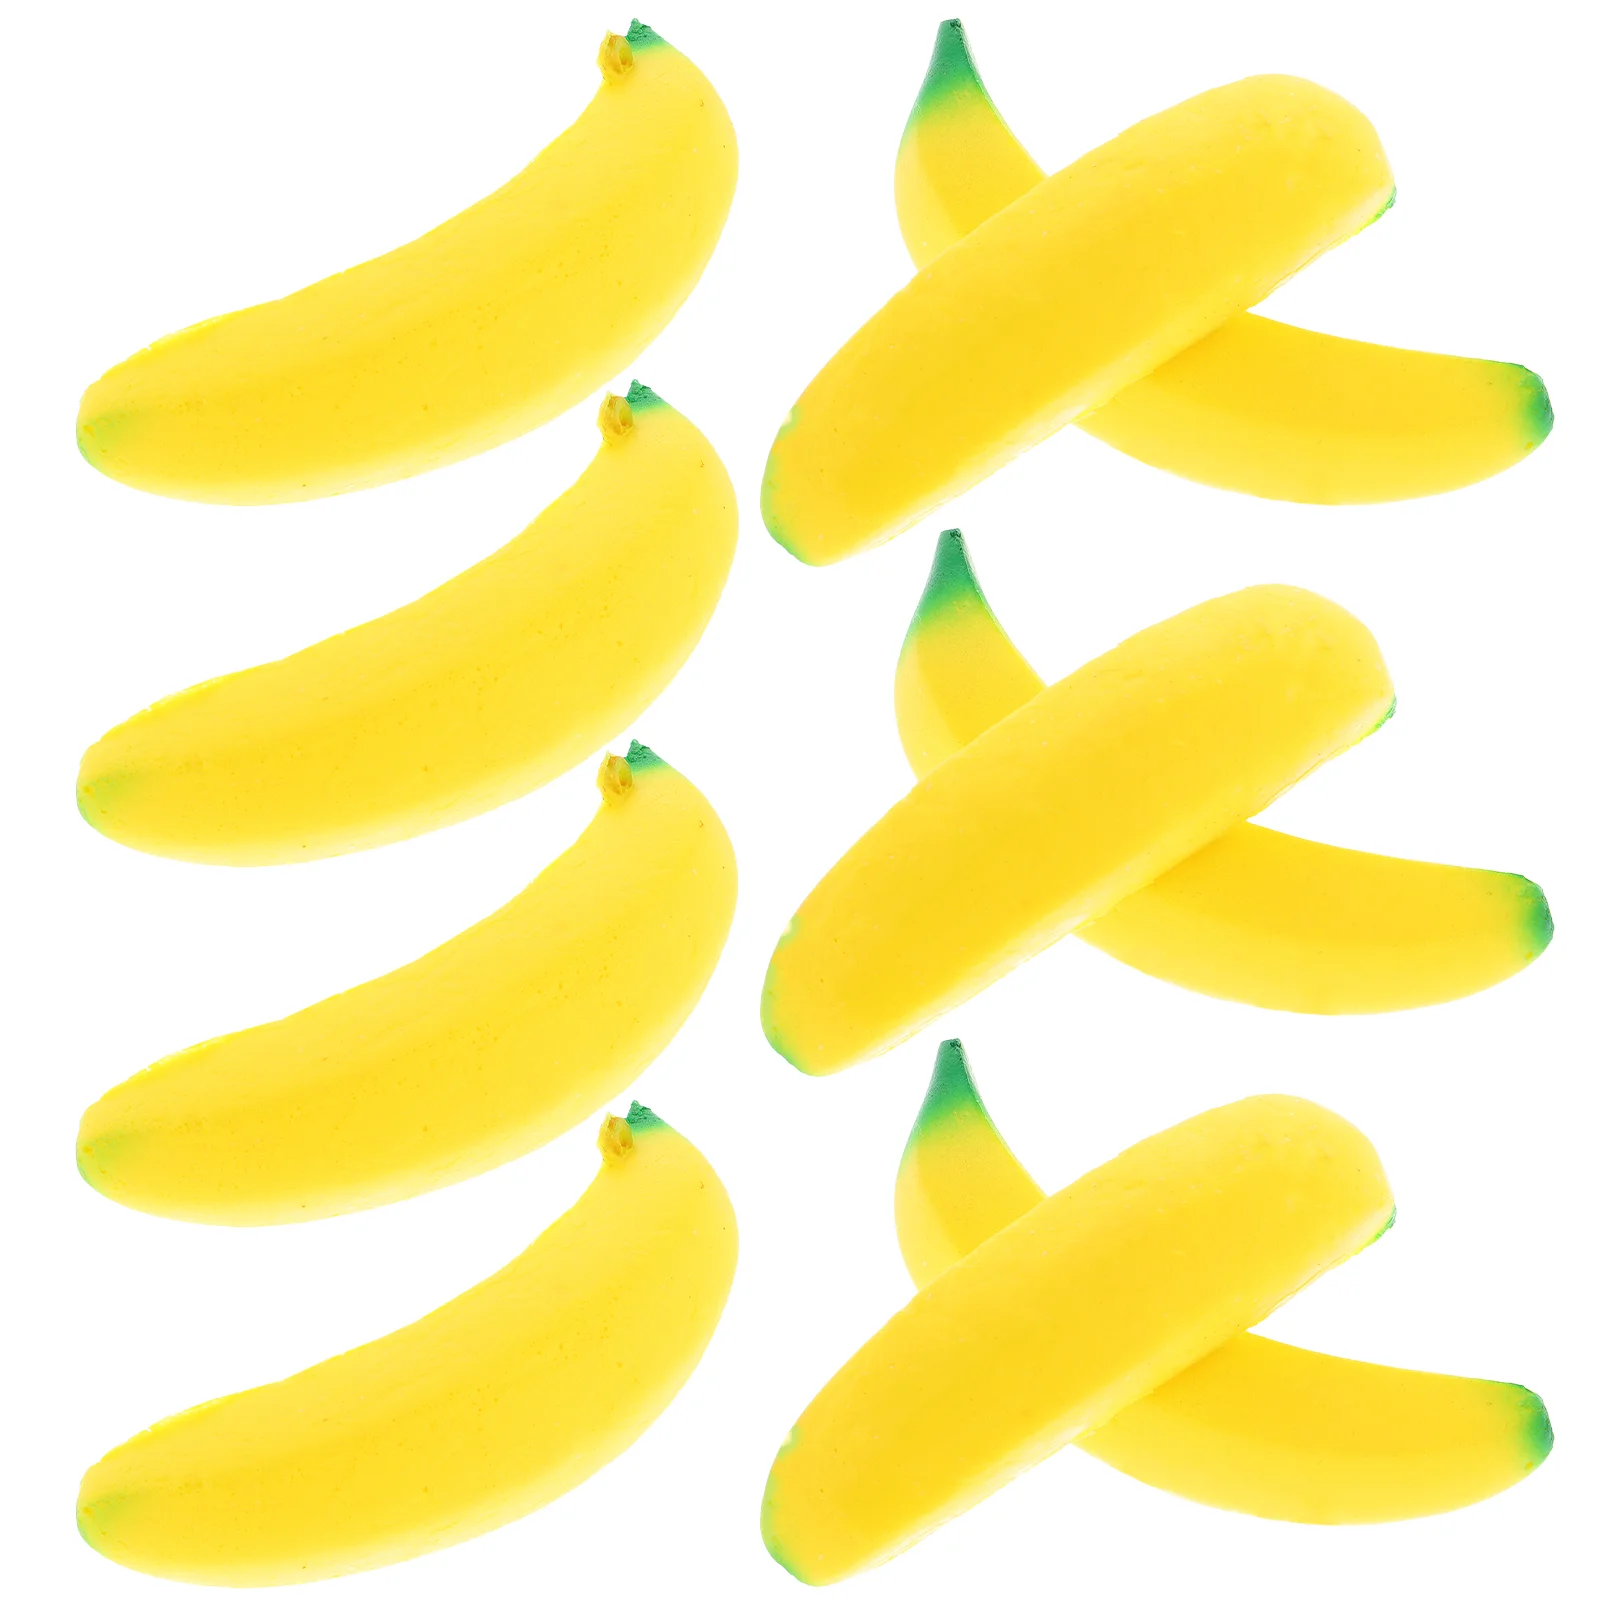 

10 Pcs Banana Pinch Squeeze Vent Toy Party Tricky Bath Gifts Pressure Relief Stretchy Sensory Adult Favor Slow Rebound Stress